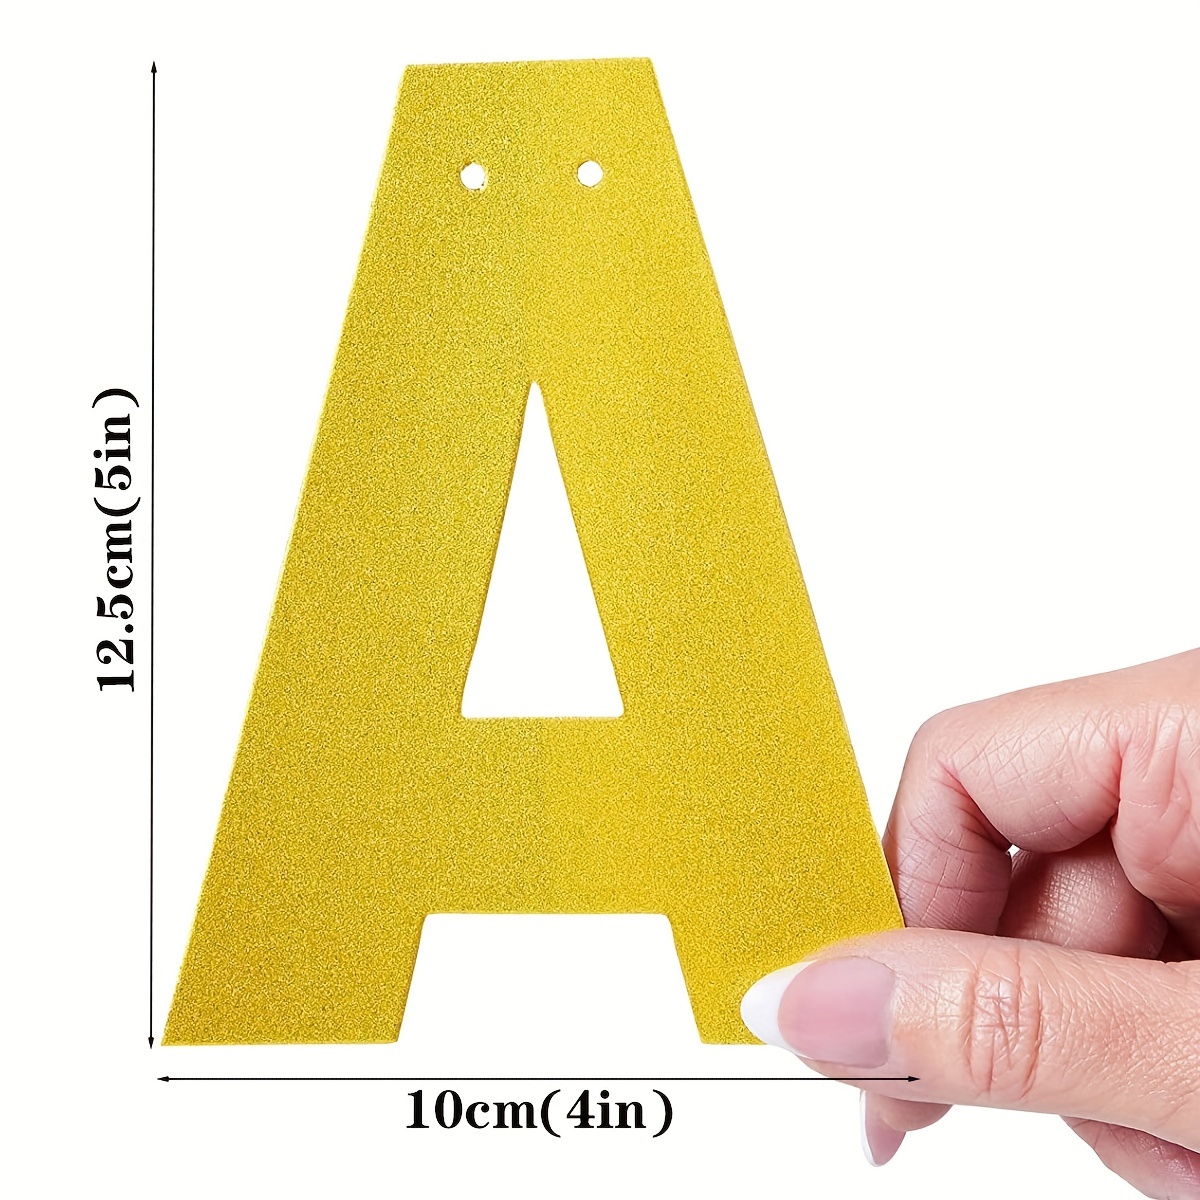 DIY Gold Glitter Customizable Banner Kit with Letters, Numbers